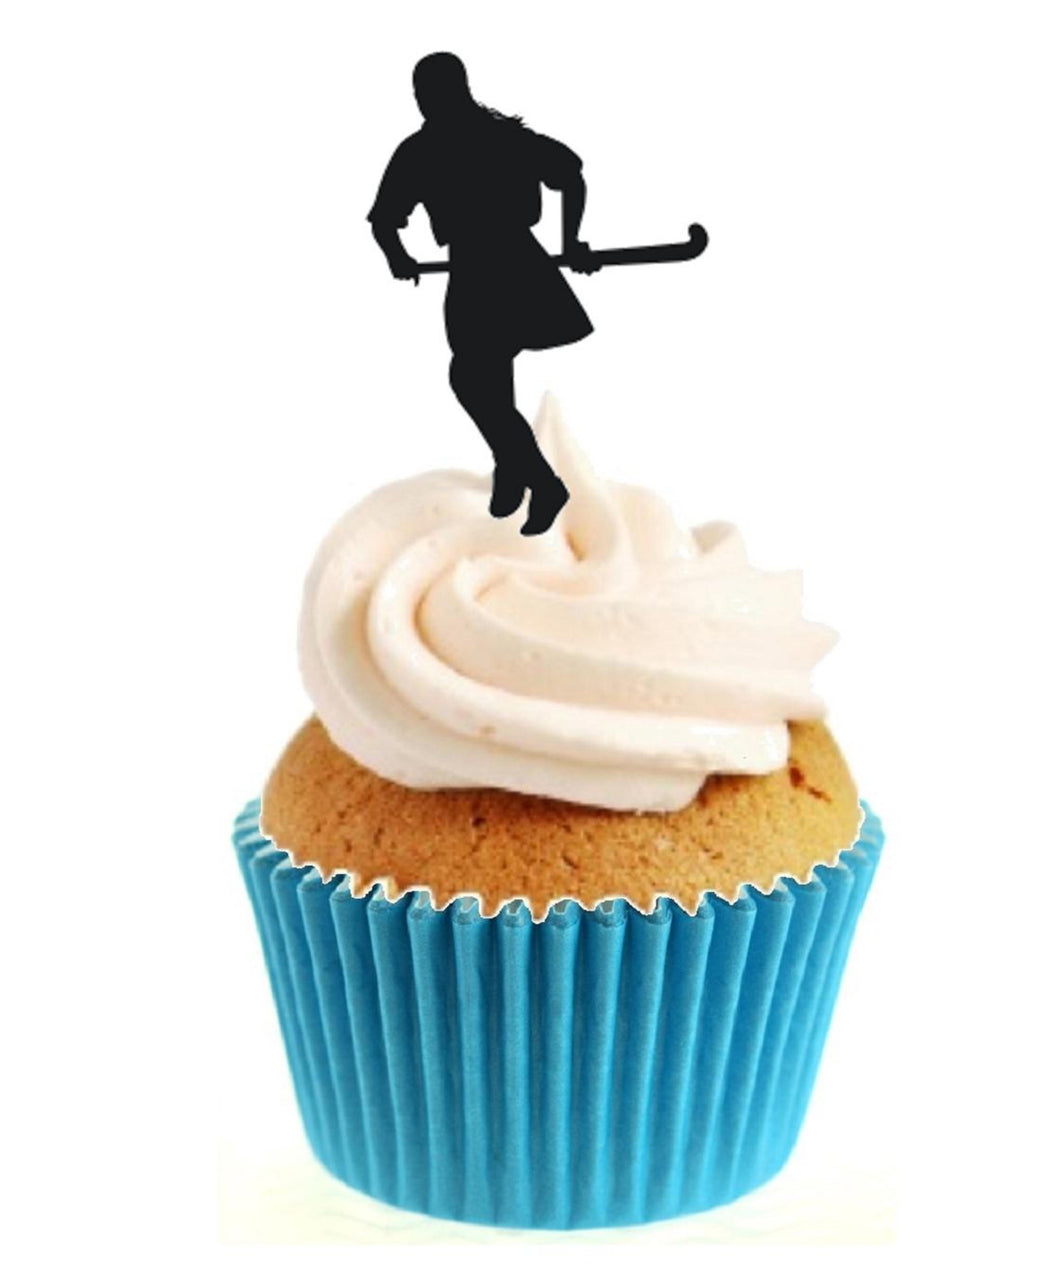 Field Hockey Female Silhouette Stand Up Cake Toppers (12 pack)  Pack contains 12 images printed onto premium wafer card